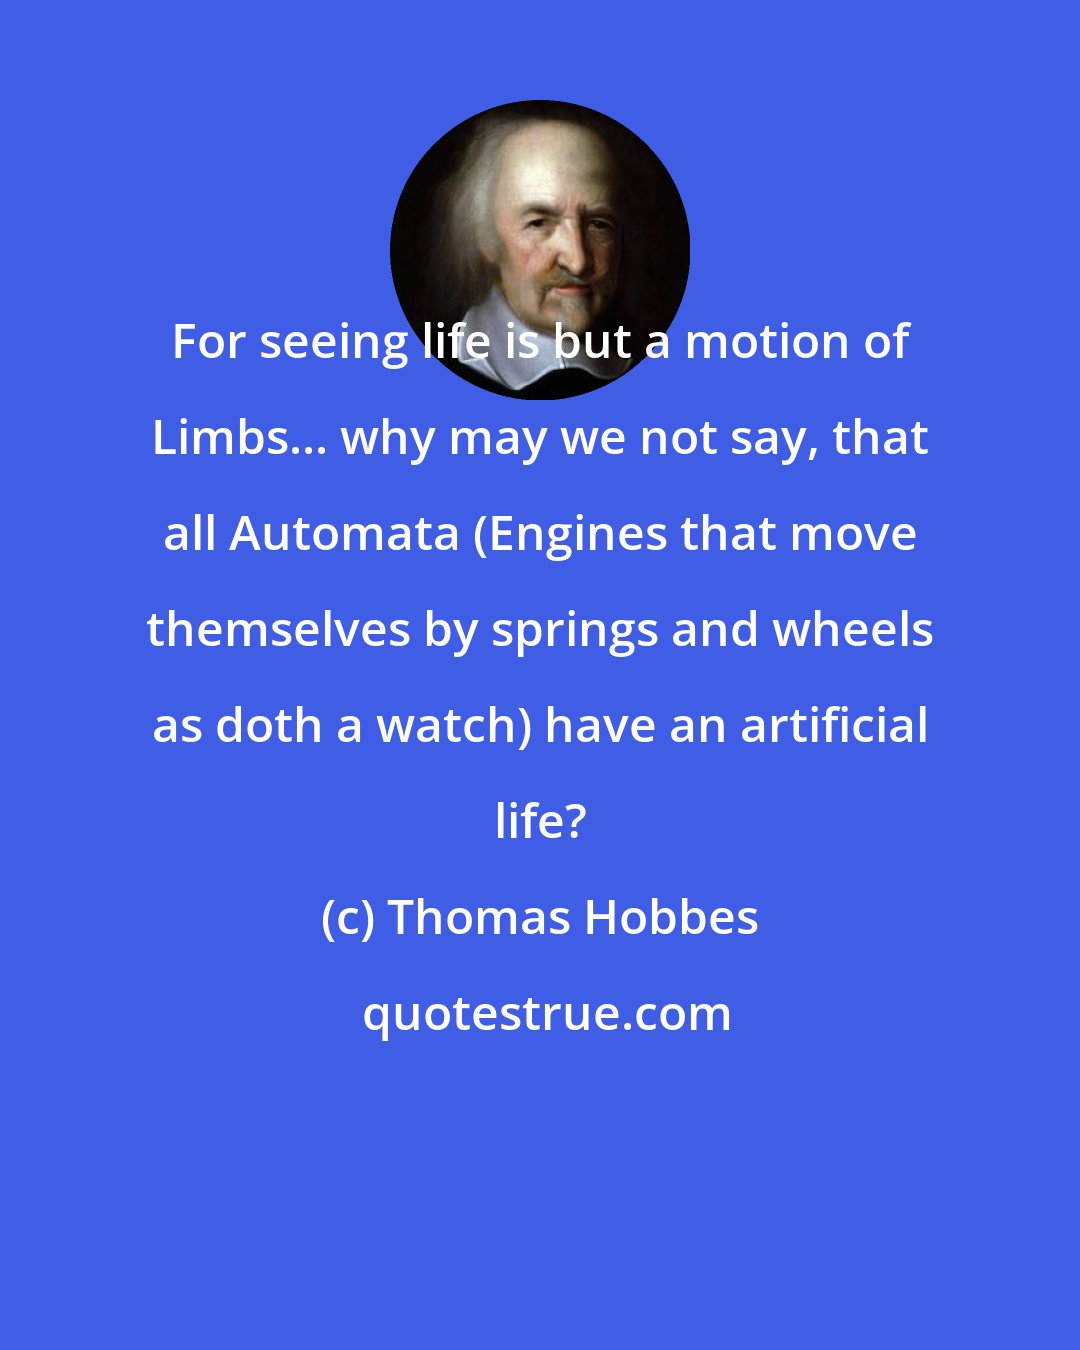 Thomas Hobbes: For seeing life is but a motion of Limbs... why may we not say, that all Automata (Engines that move themselves by springs and wheels as doth a watch) have an artificial life?